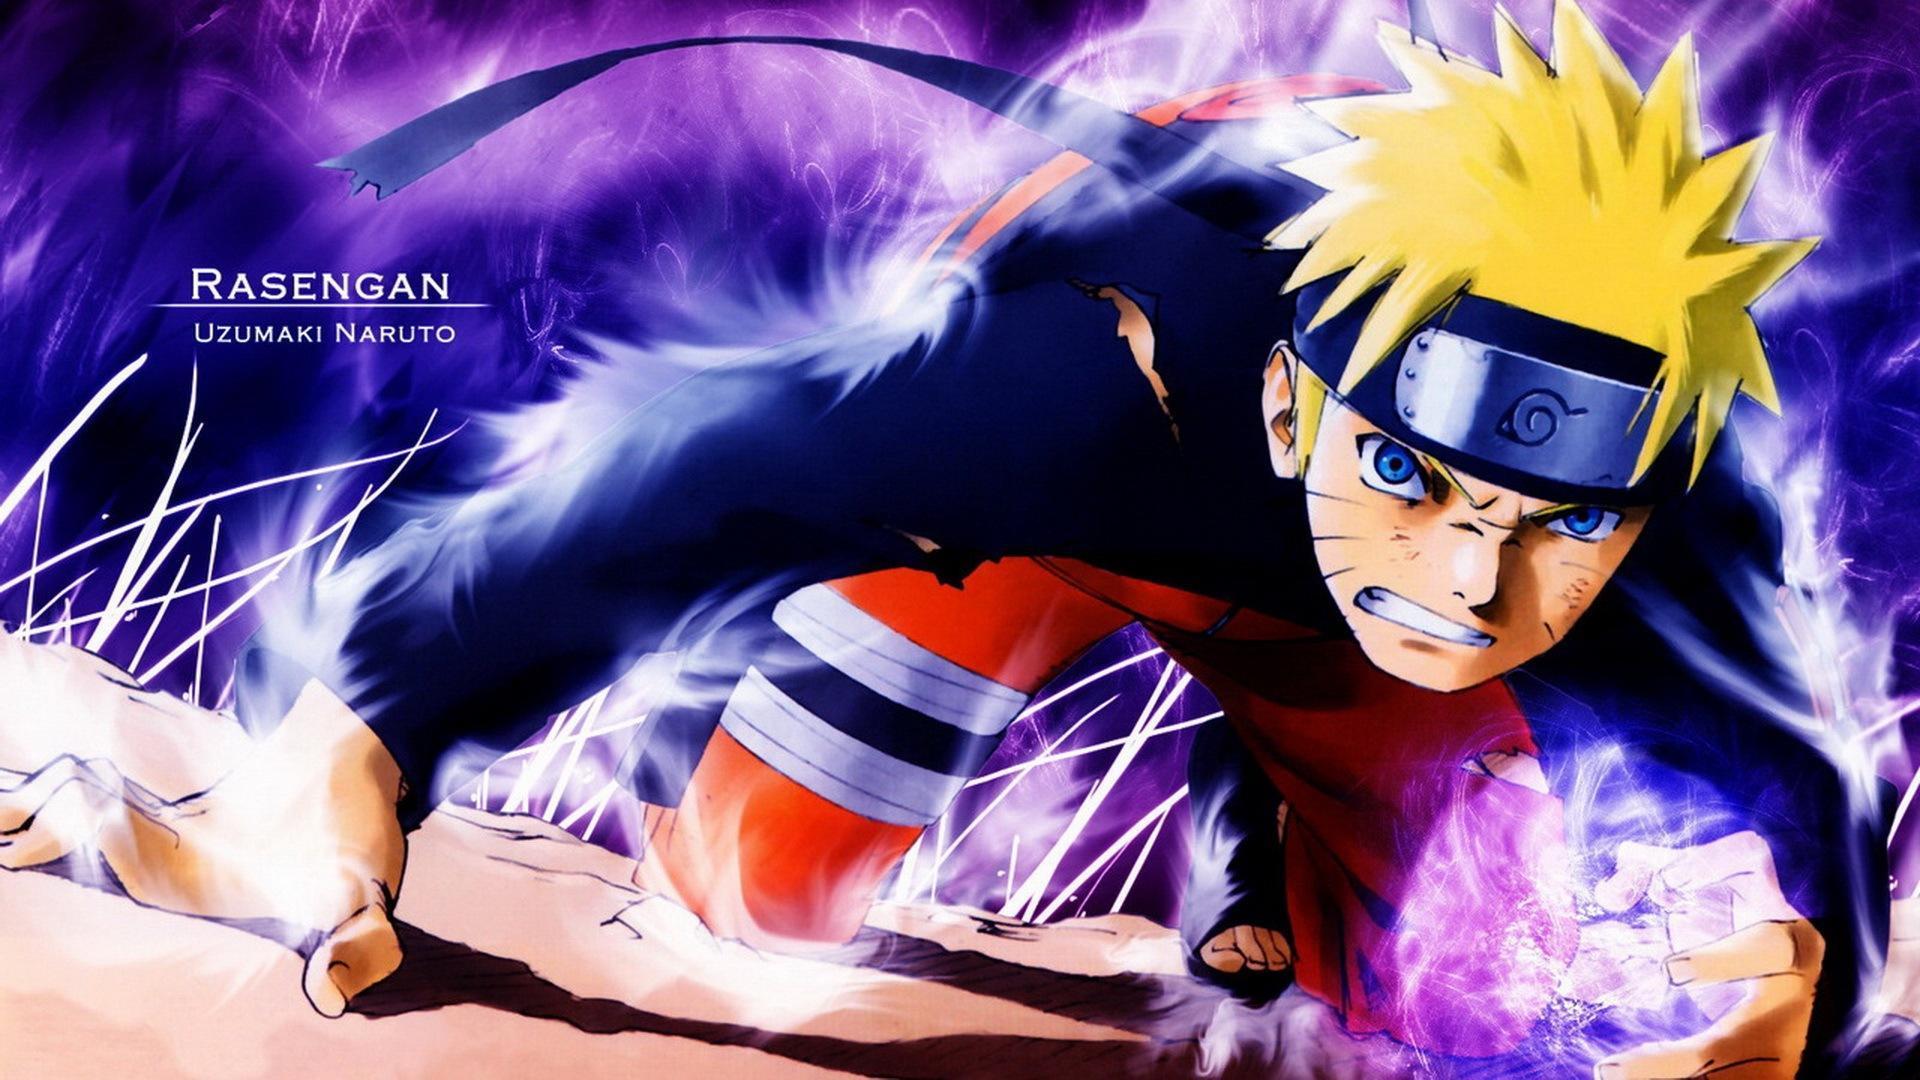 10 Cool Naruto iPhone wallpapers in 2023 (Free HD download) - iGeeksBlog